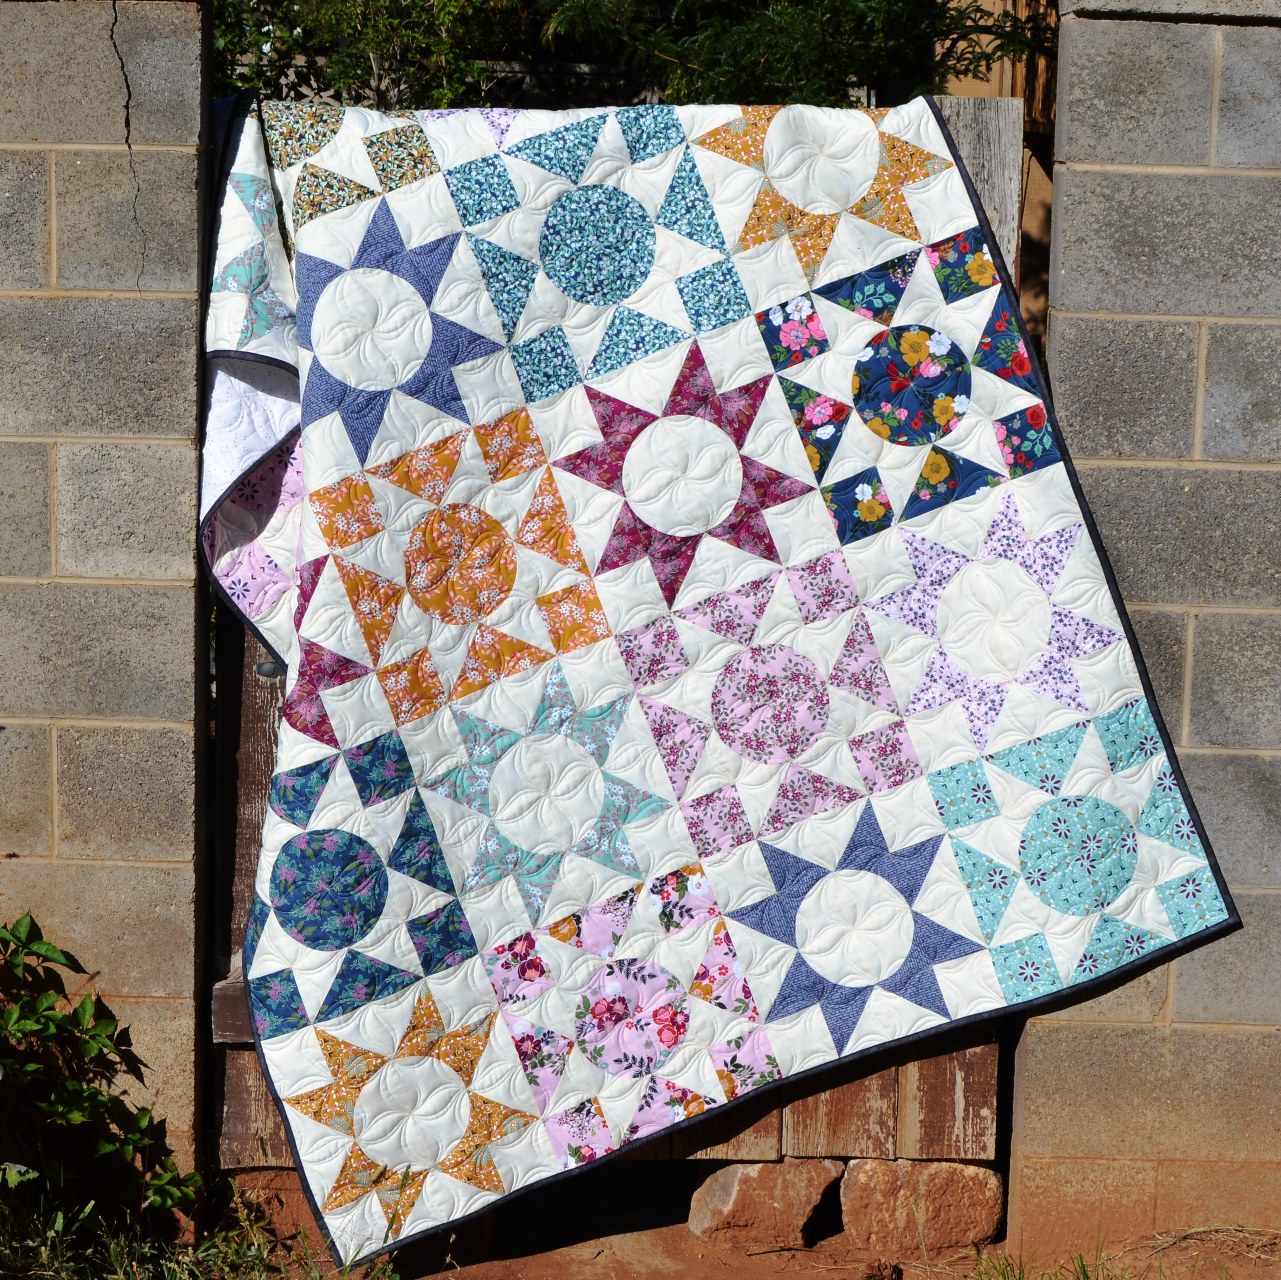 100+ Bedazzling Star Quilt Patterns for Beginners and Beyond